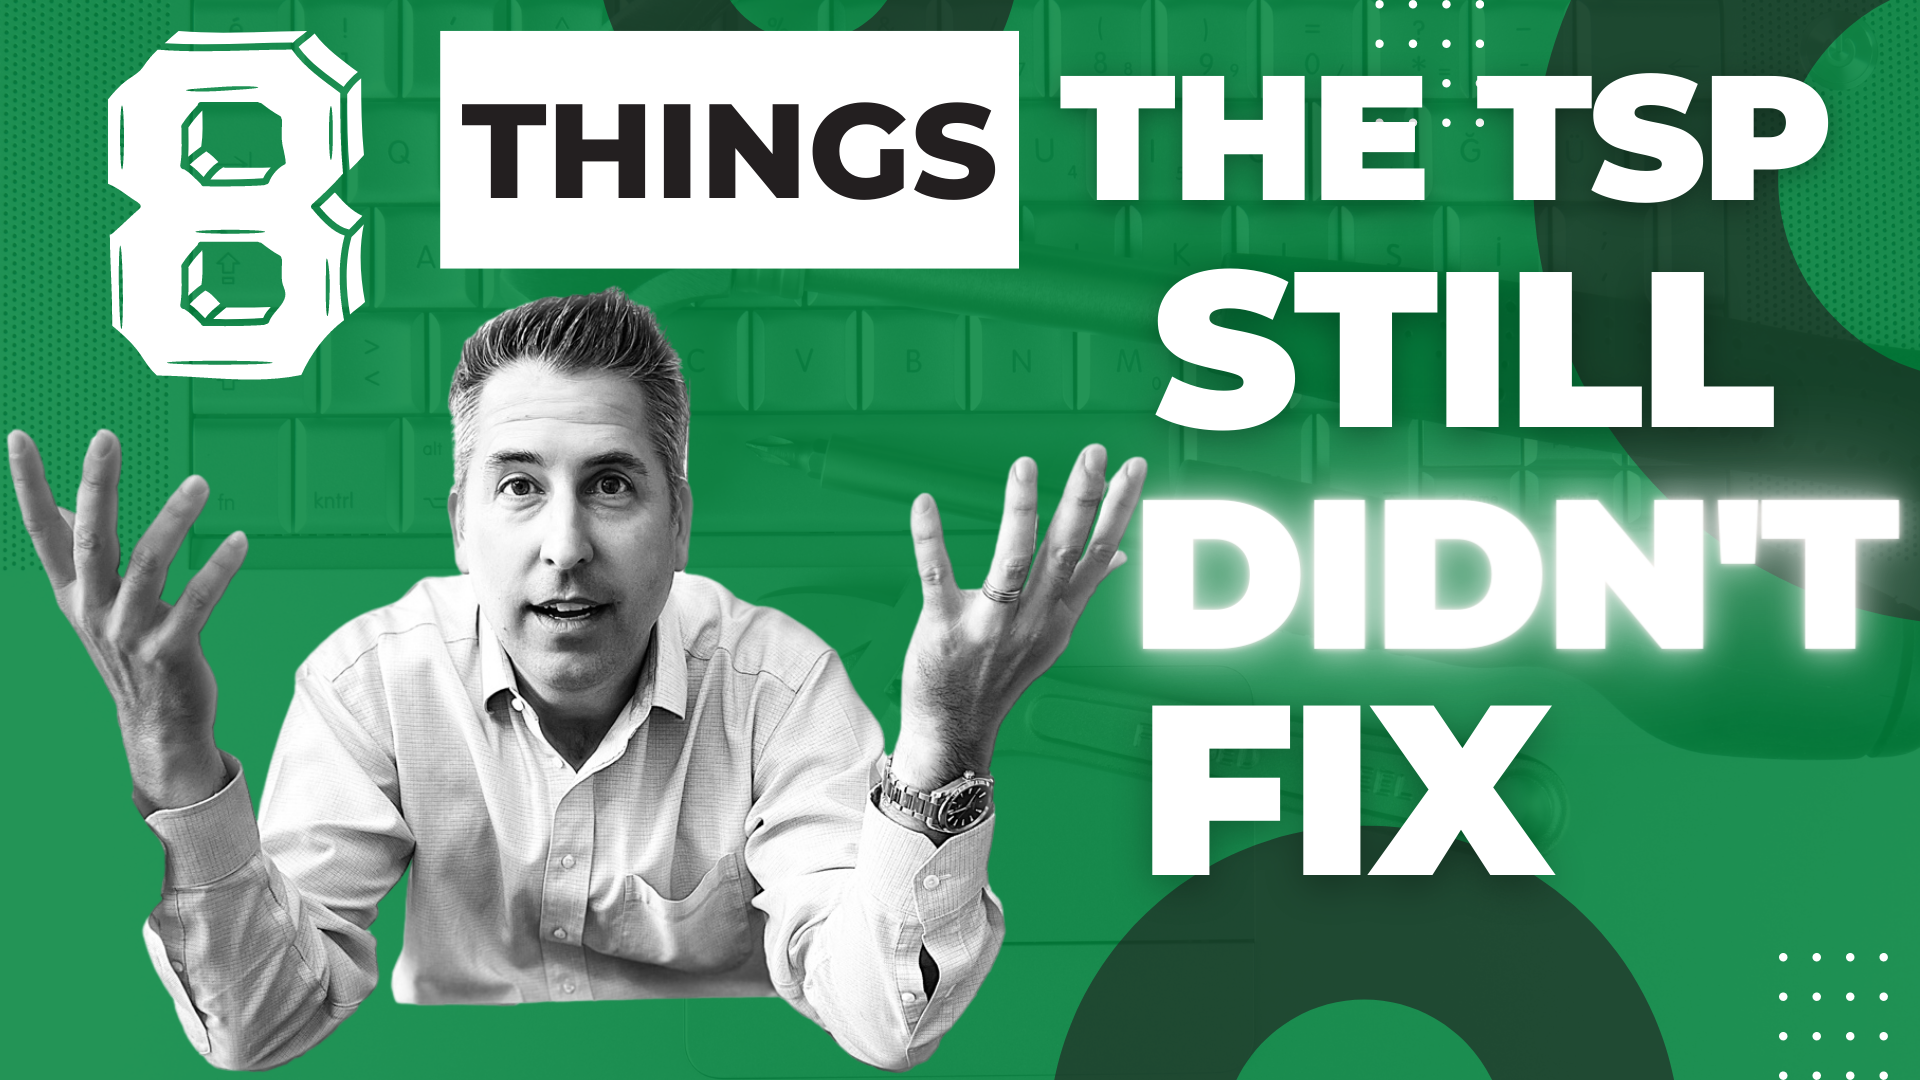 8 things the TSP did not fix